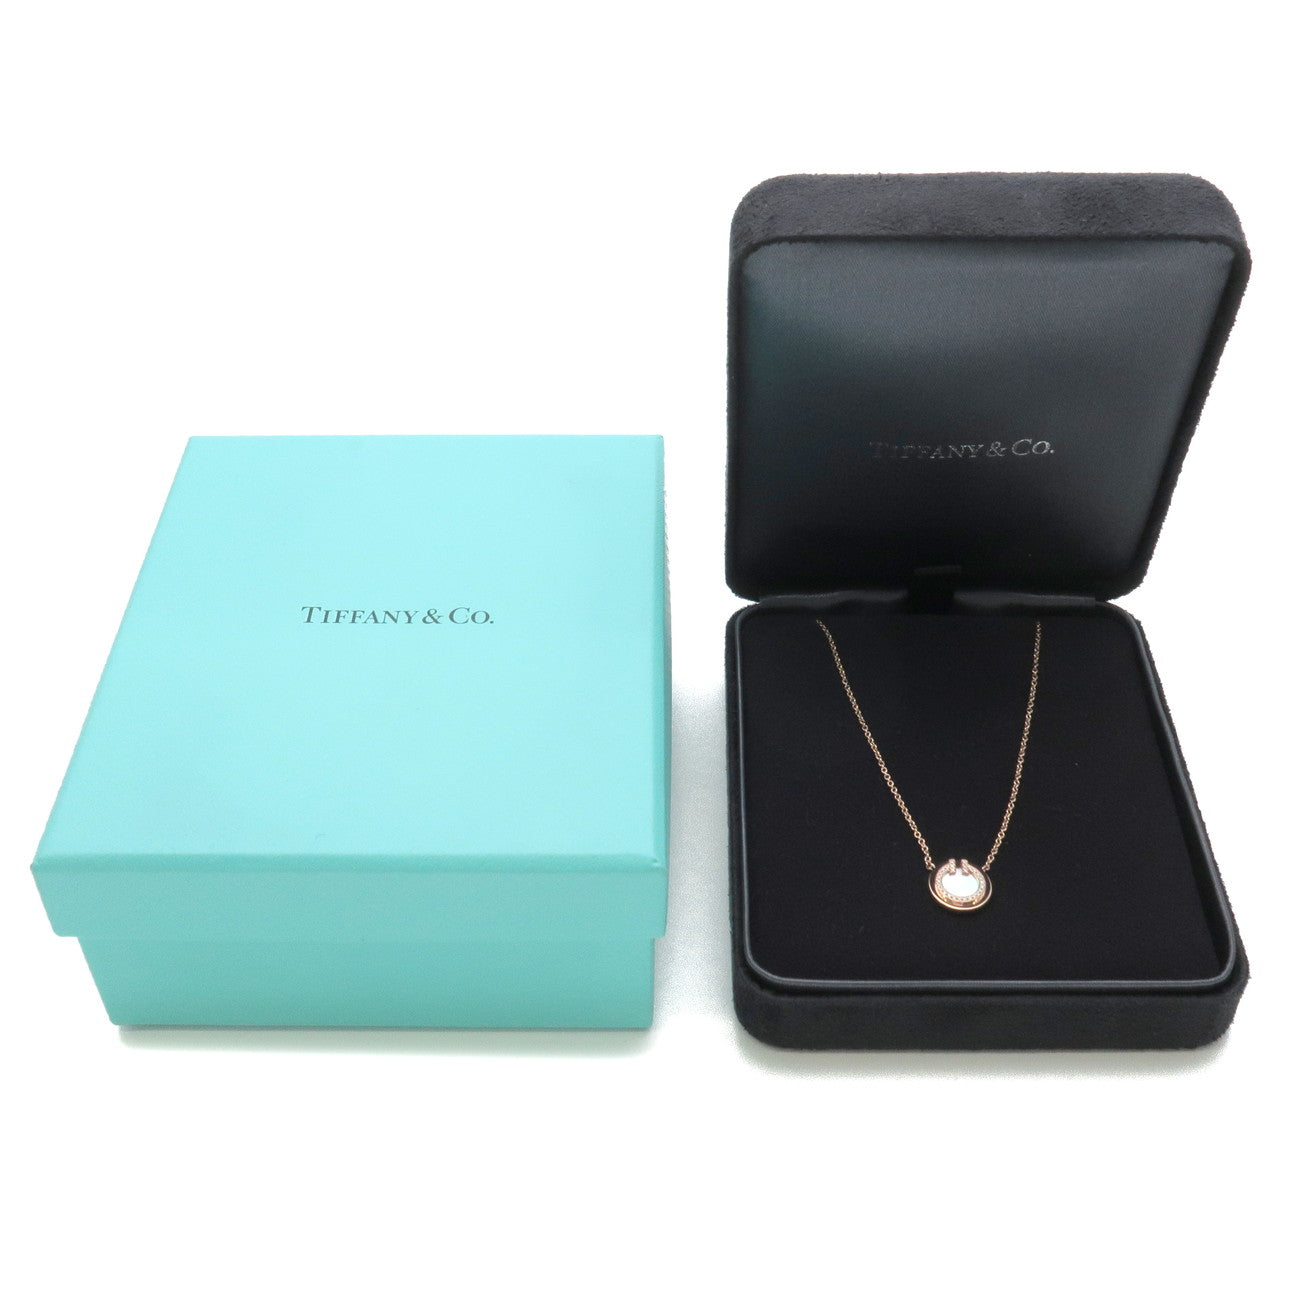 Tiffany&Co. T TWO Mother of Pearl Diamond Necklace 0.03ct K18PG